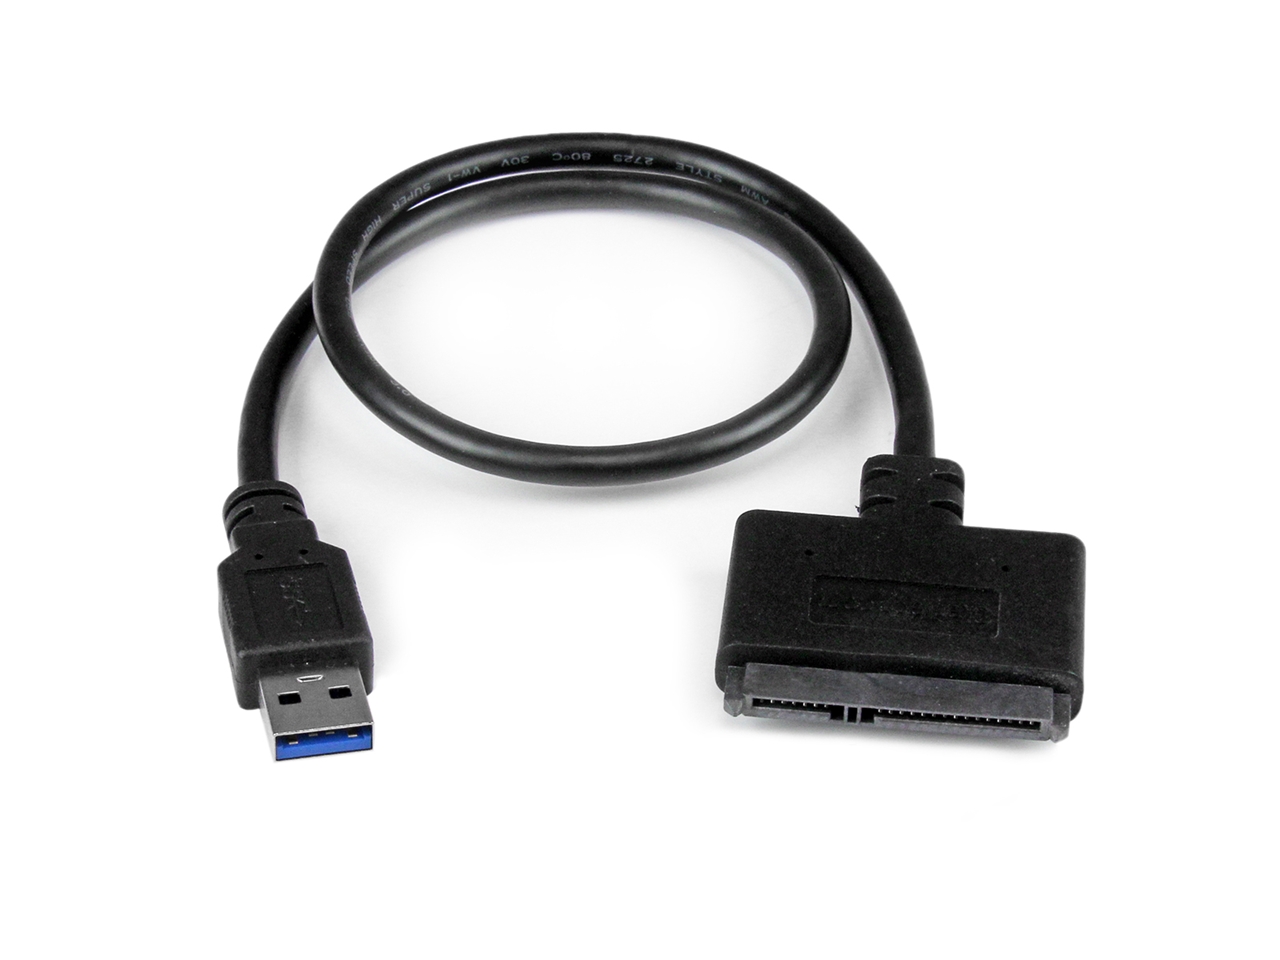 tæppe Credential Genre USB 3.0 To 2.5” SATA III Hard Drive Adapter at Cables N More